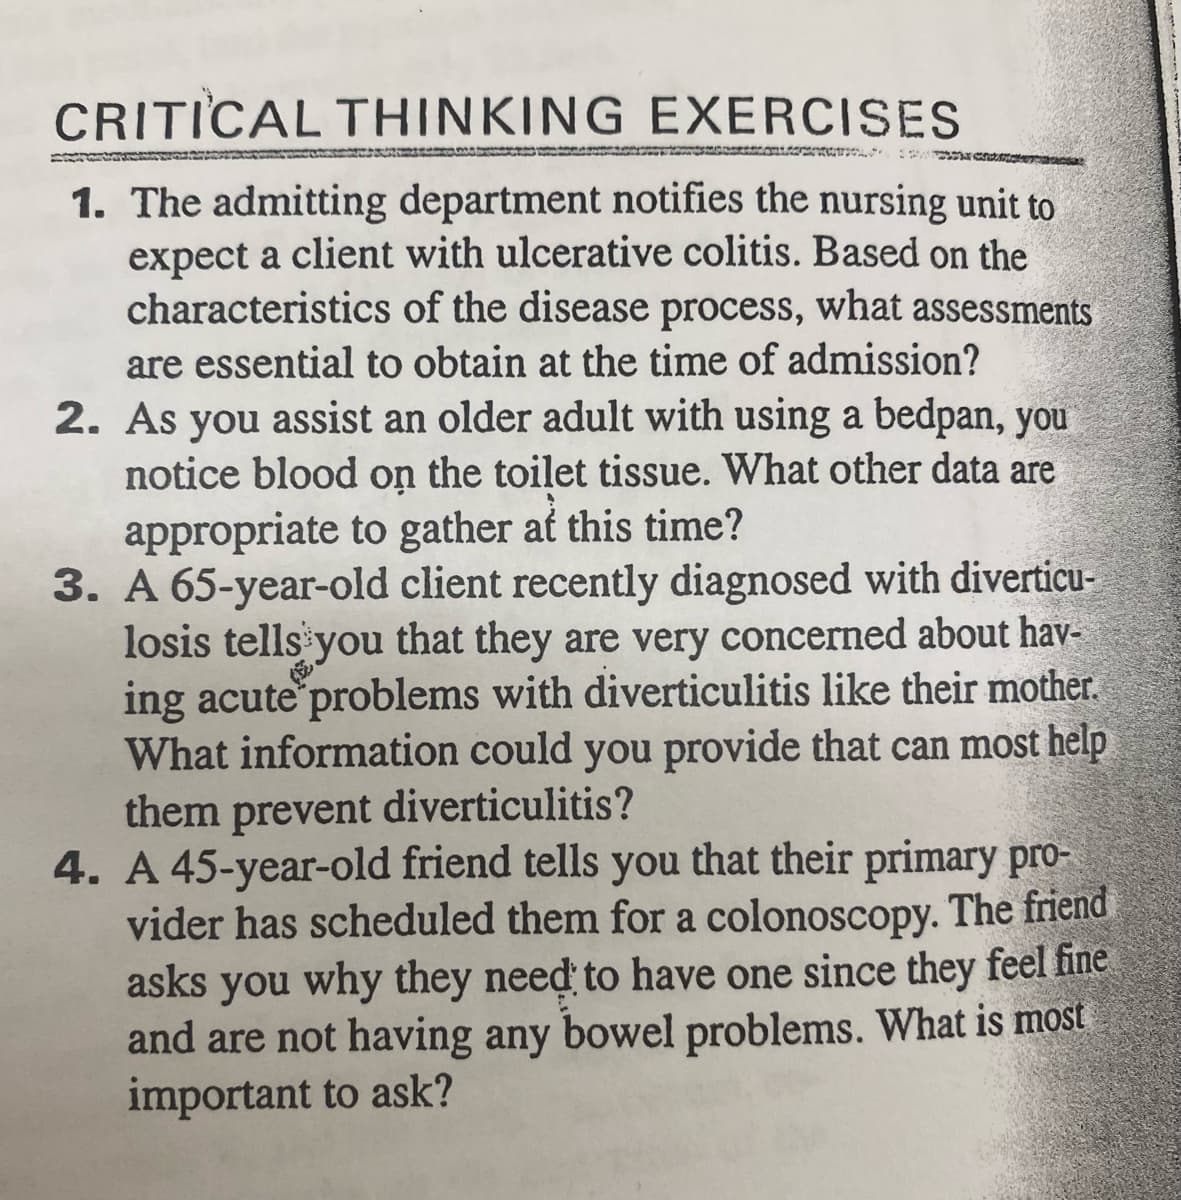 CRITICAL THINKING
EXERCISES
1. The admitting department notifies the nursing unit to
expect a client with ulcerative colitis. Based on the
characteristics of the disease process, what assessments
are essential to obtain at the time of admission?
2. As you assist an older adult with using a bedpan, you
notice blood on the toilet tissue. What other data are
appropriate to gather at this time?
3. A 65-year-old client recently diagnosed with diverticu-
losis tells you that they are very concerned about hav-
ing acute problems with diverticulitis like their mother.
What information could you provide that can most help
them prevent diverticulitis?
4. A 45-year-old friend tells you that their primary pro-
vider has scheduled them for a colonoscopy. The friend
asks you why they need to have one since they feel fine
and are not having any bowel problems. What is most
important to ask?